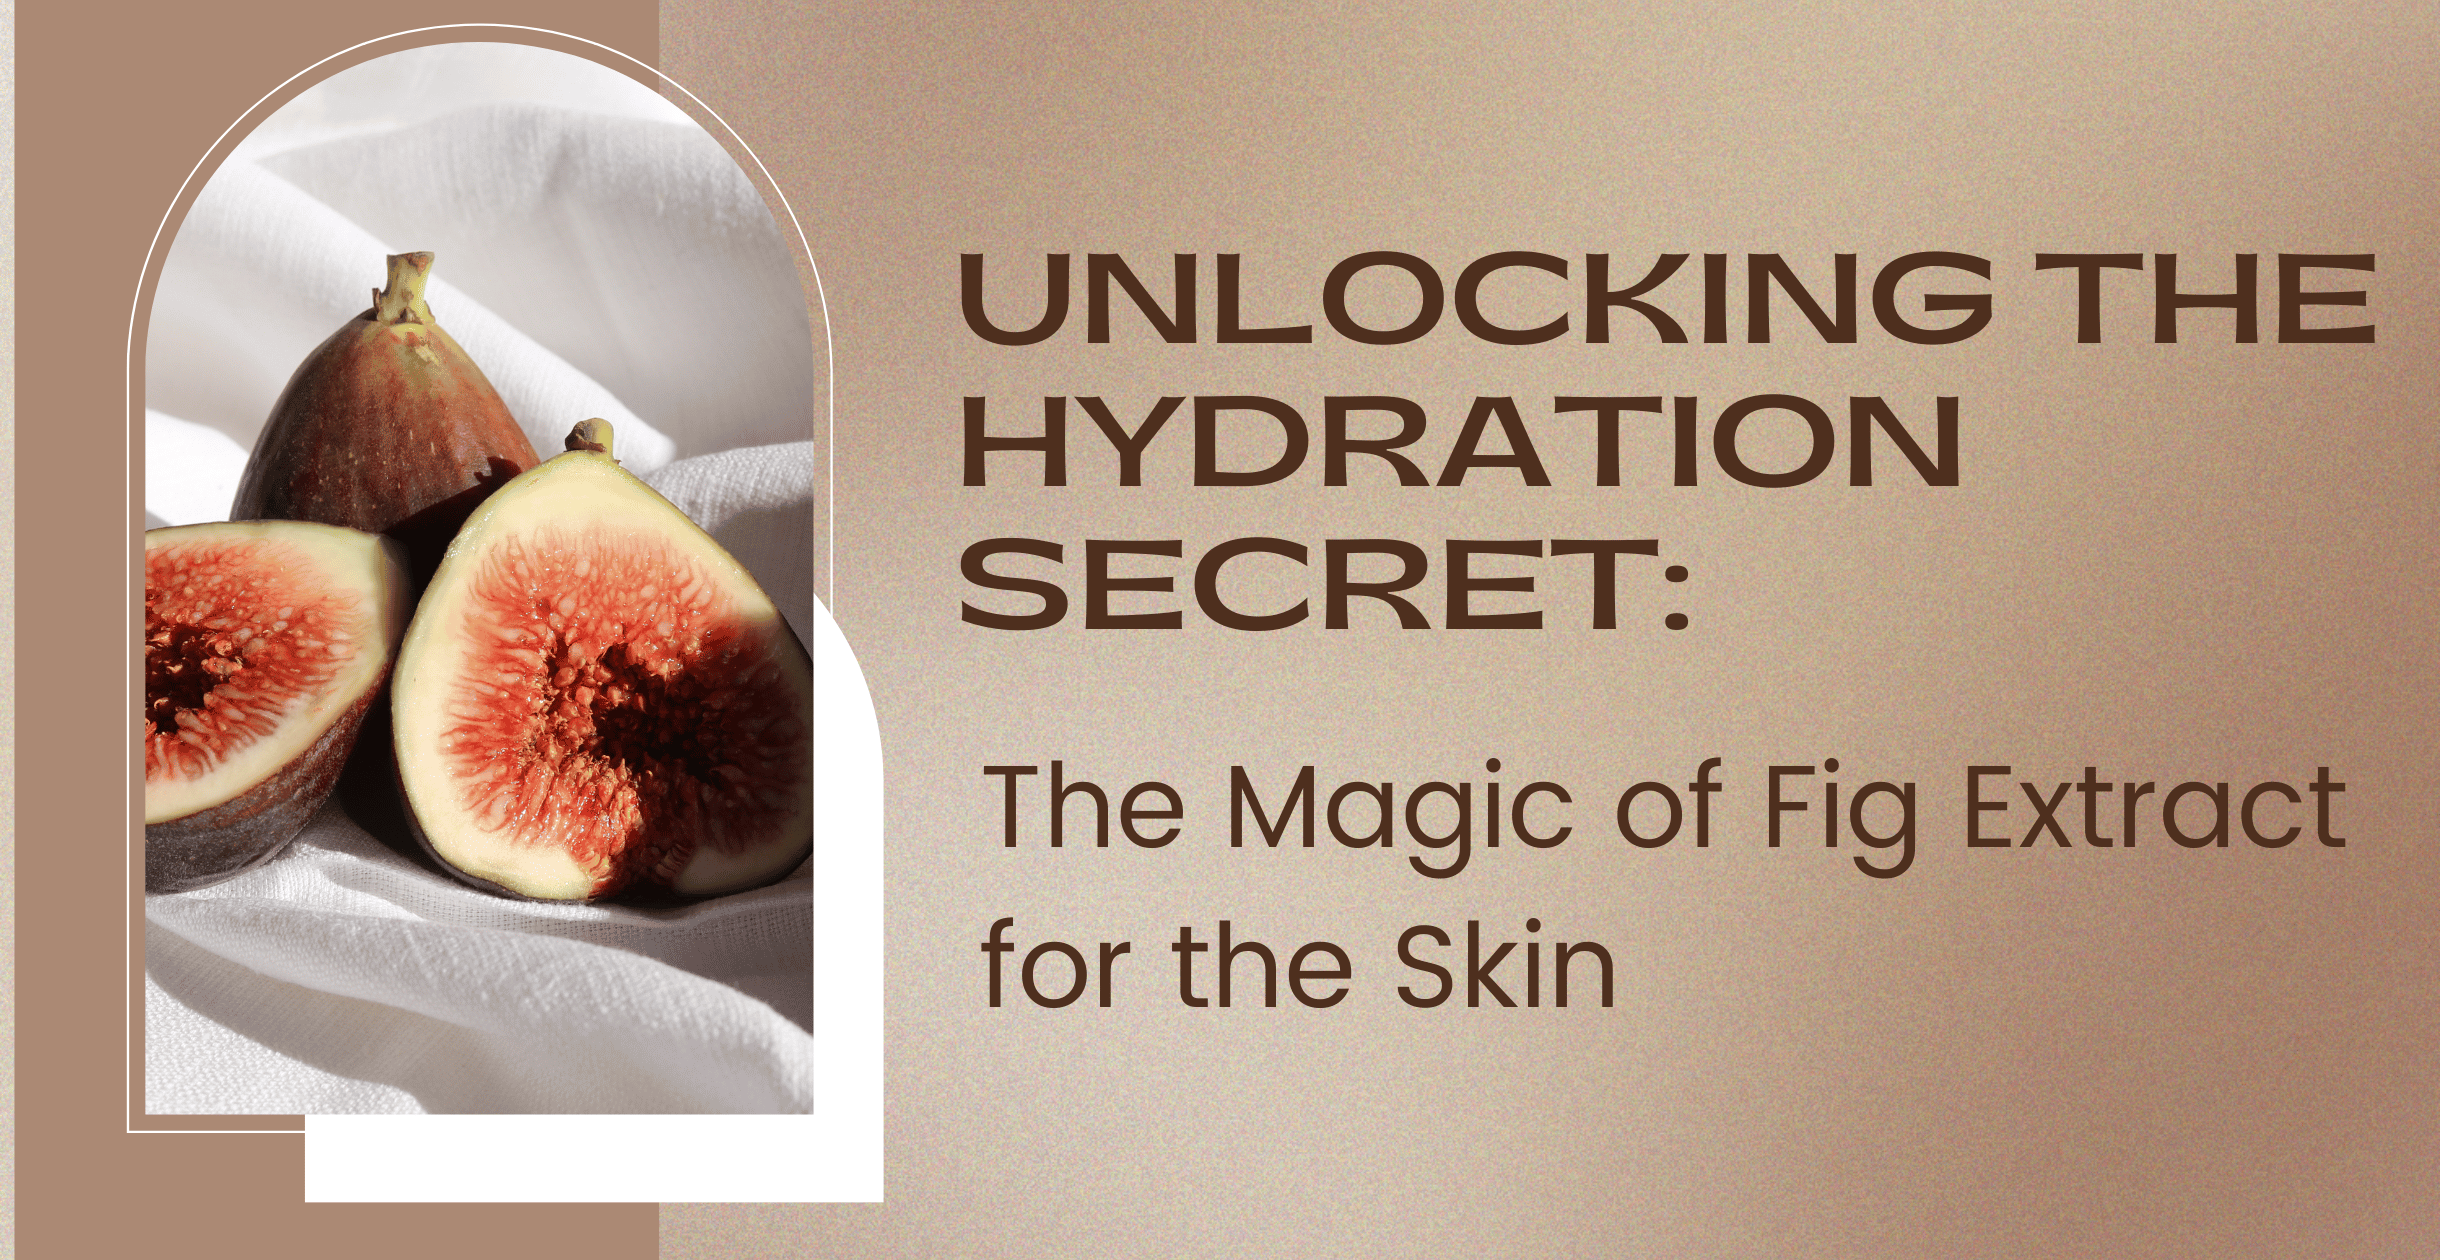 Unlocking the Hydration Secret: The Magic of Fig Extract for the Skin